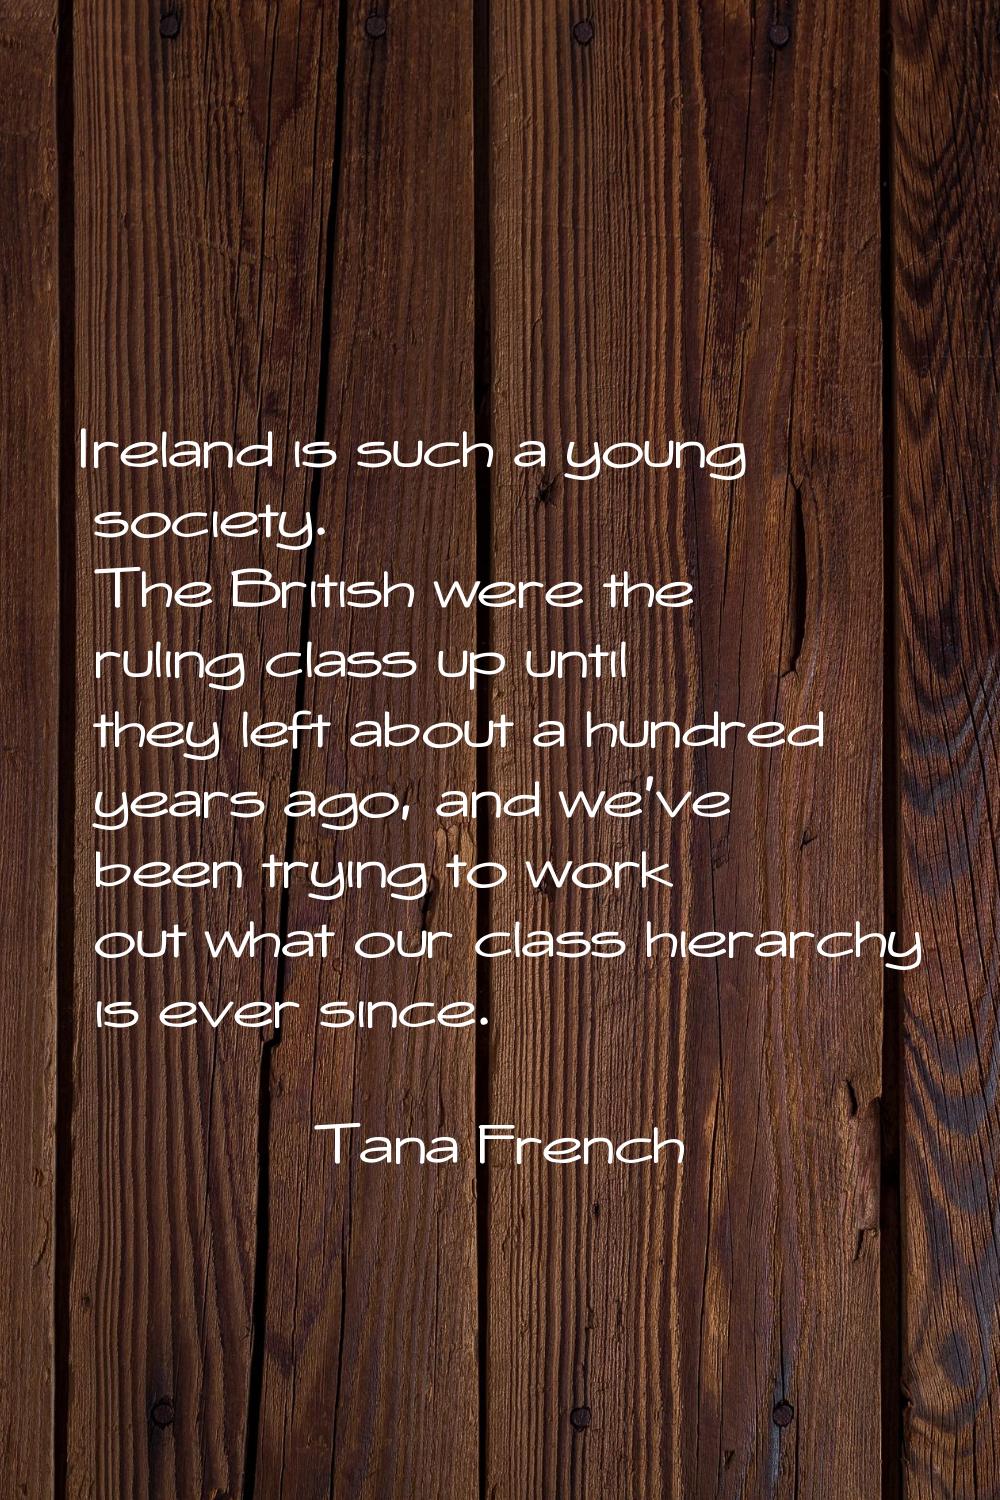 Ireland is such a young society. The British were the ruling class up until they left about a hundr